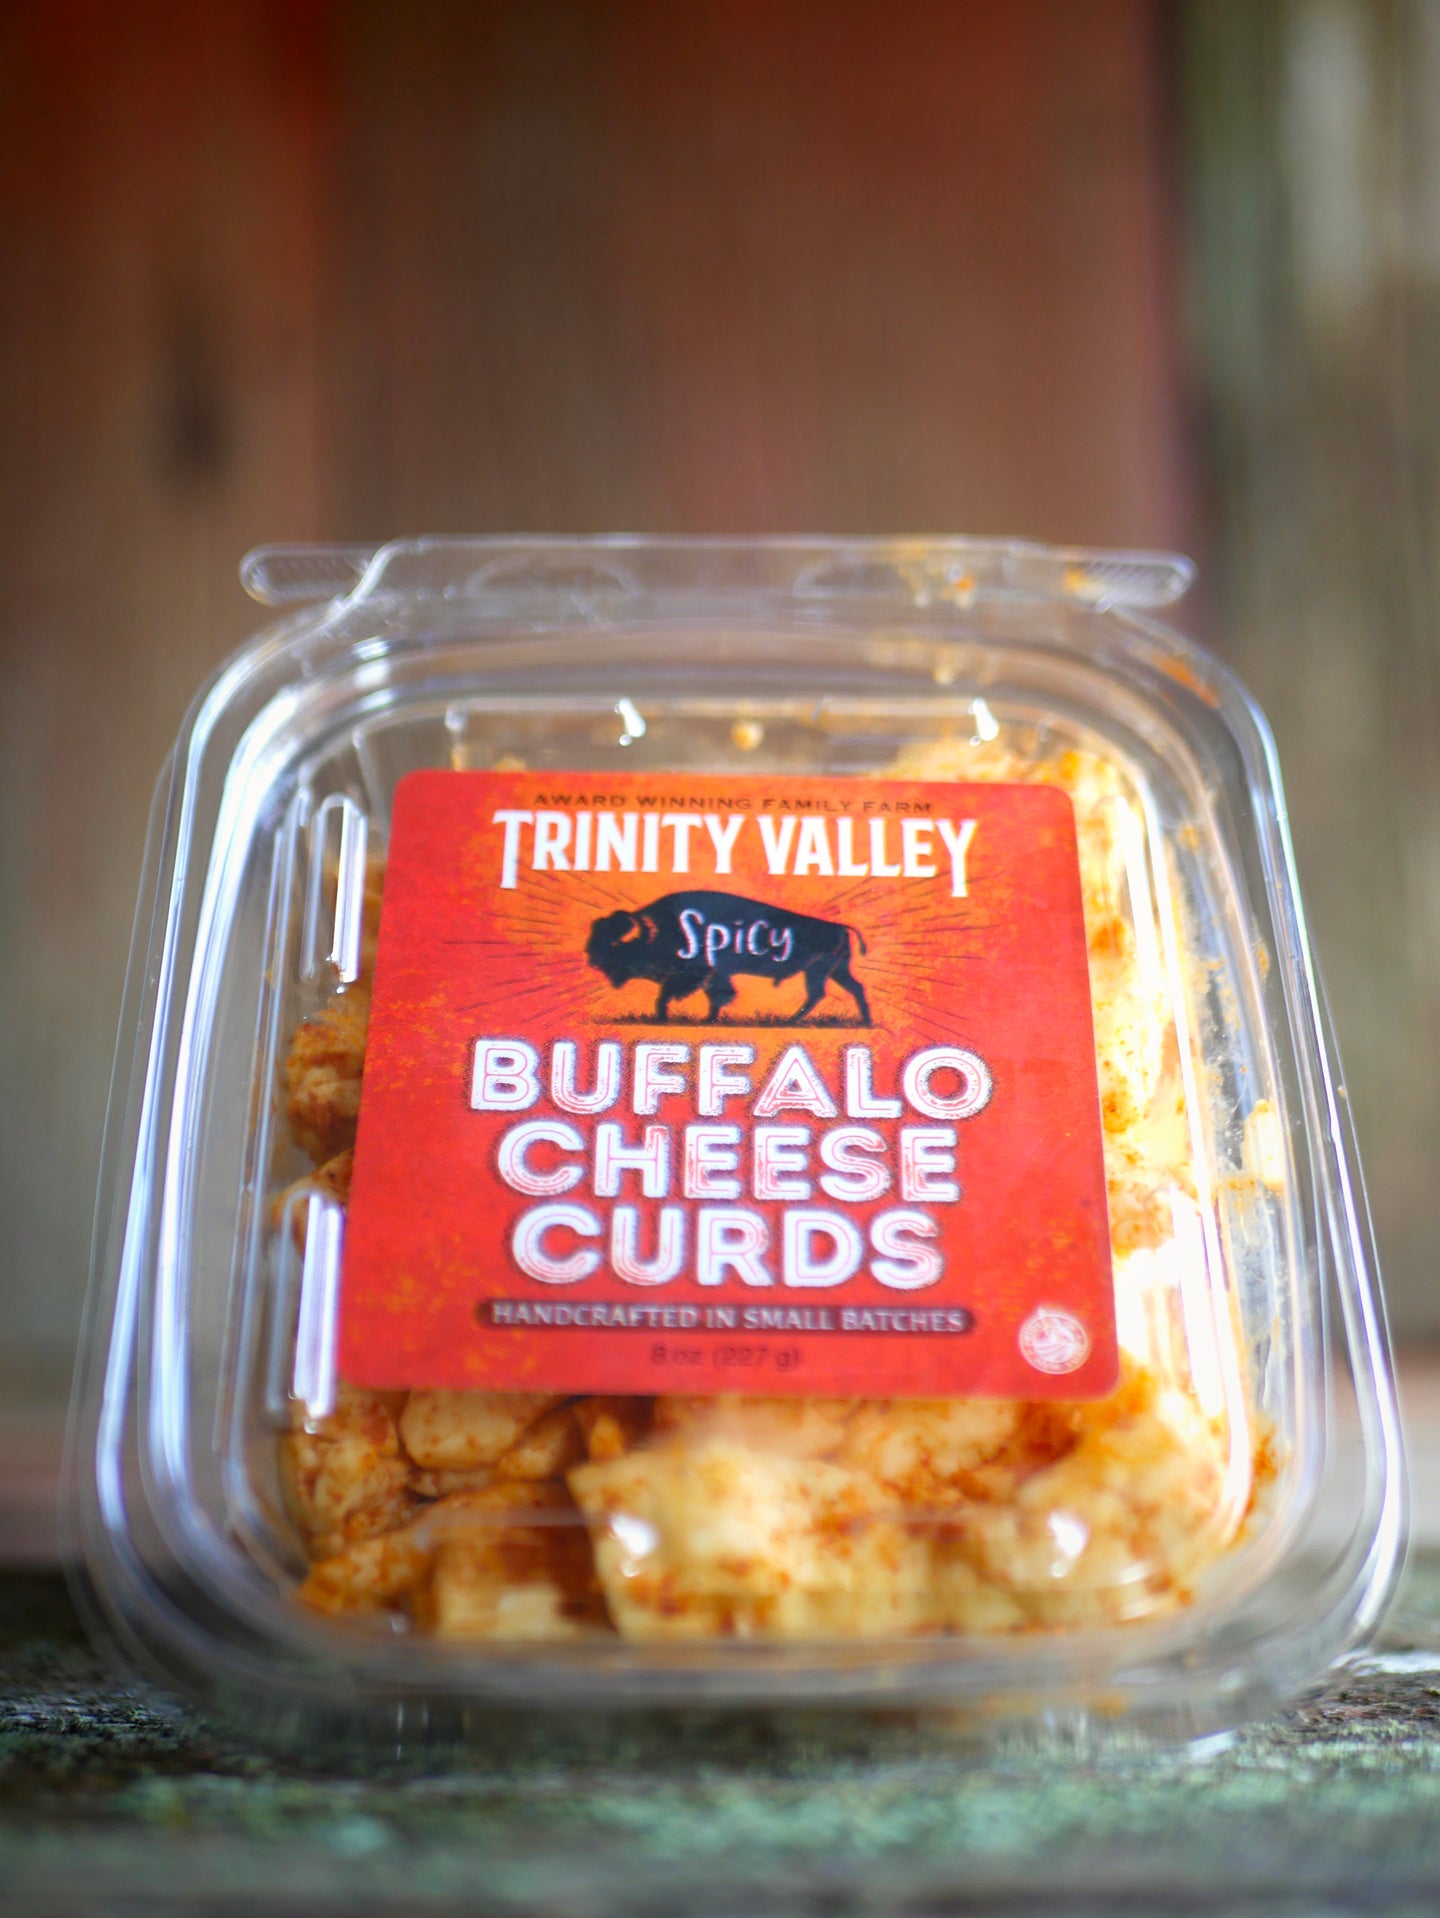 Trinity Valley Handcrafted Artisan Buffalo Cheese Curd